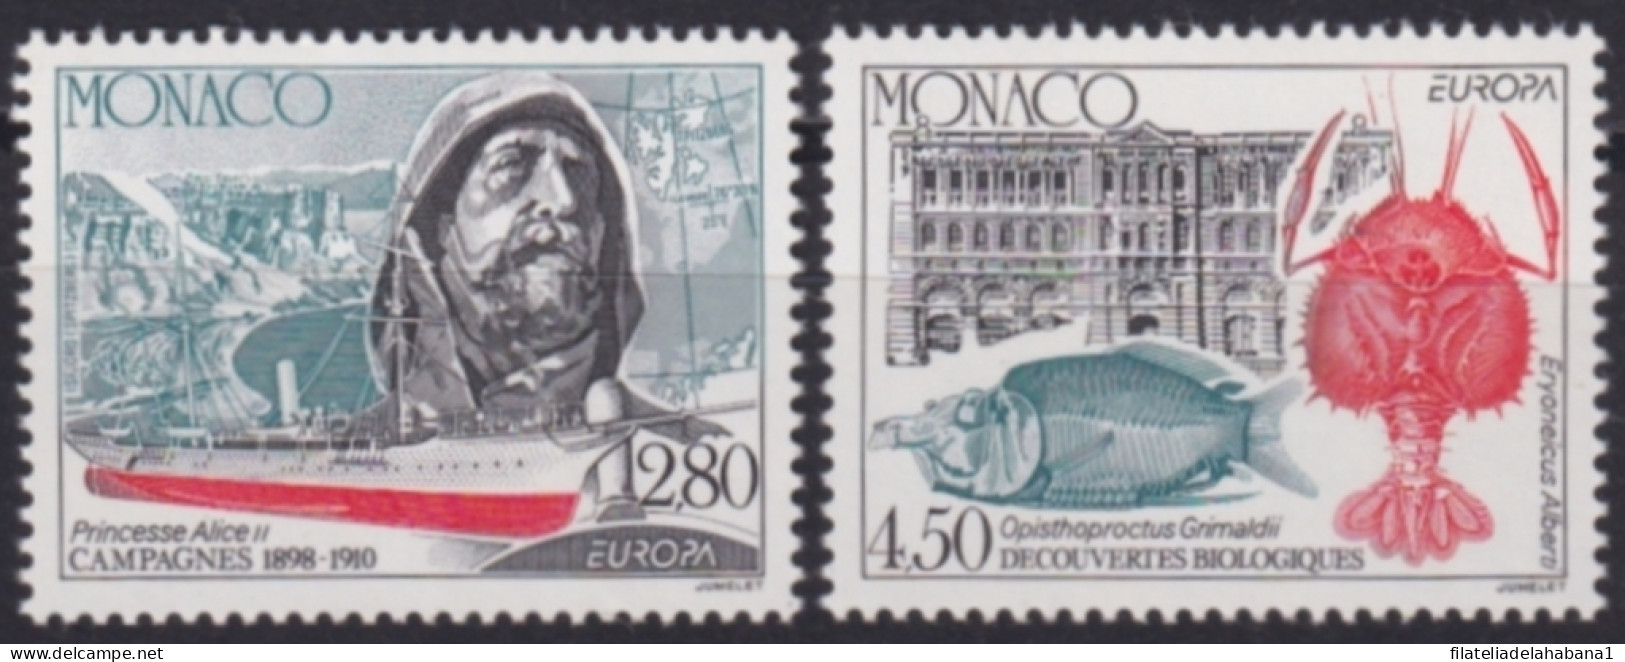 F-EX50136 MONACO MNH 1994 BIOLOGYC DISCOVERY PRINCE ALBERT EXPEDITION FISH PECES.  - Fische